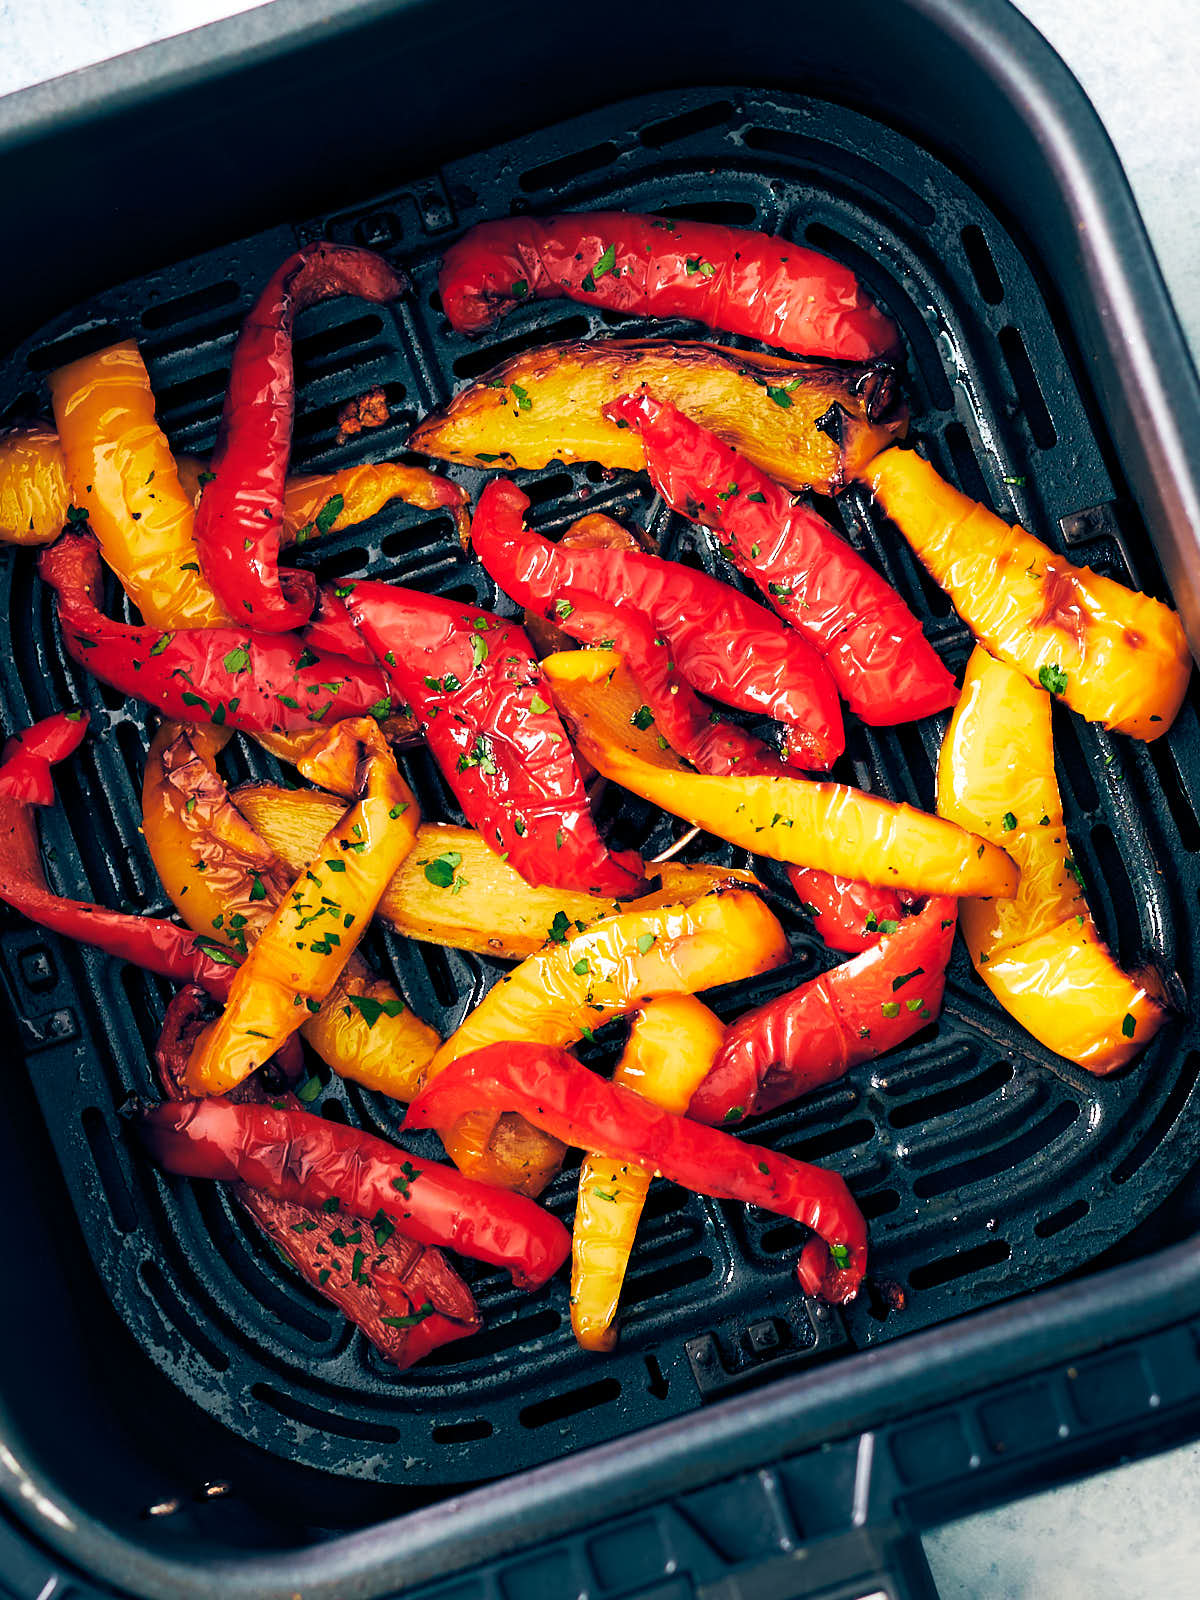 Red and yellow bell peppers in an air fryer basket.